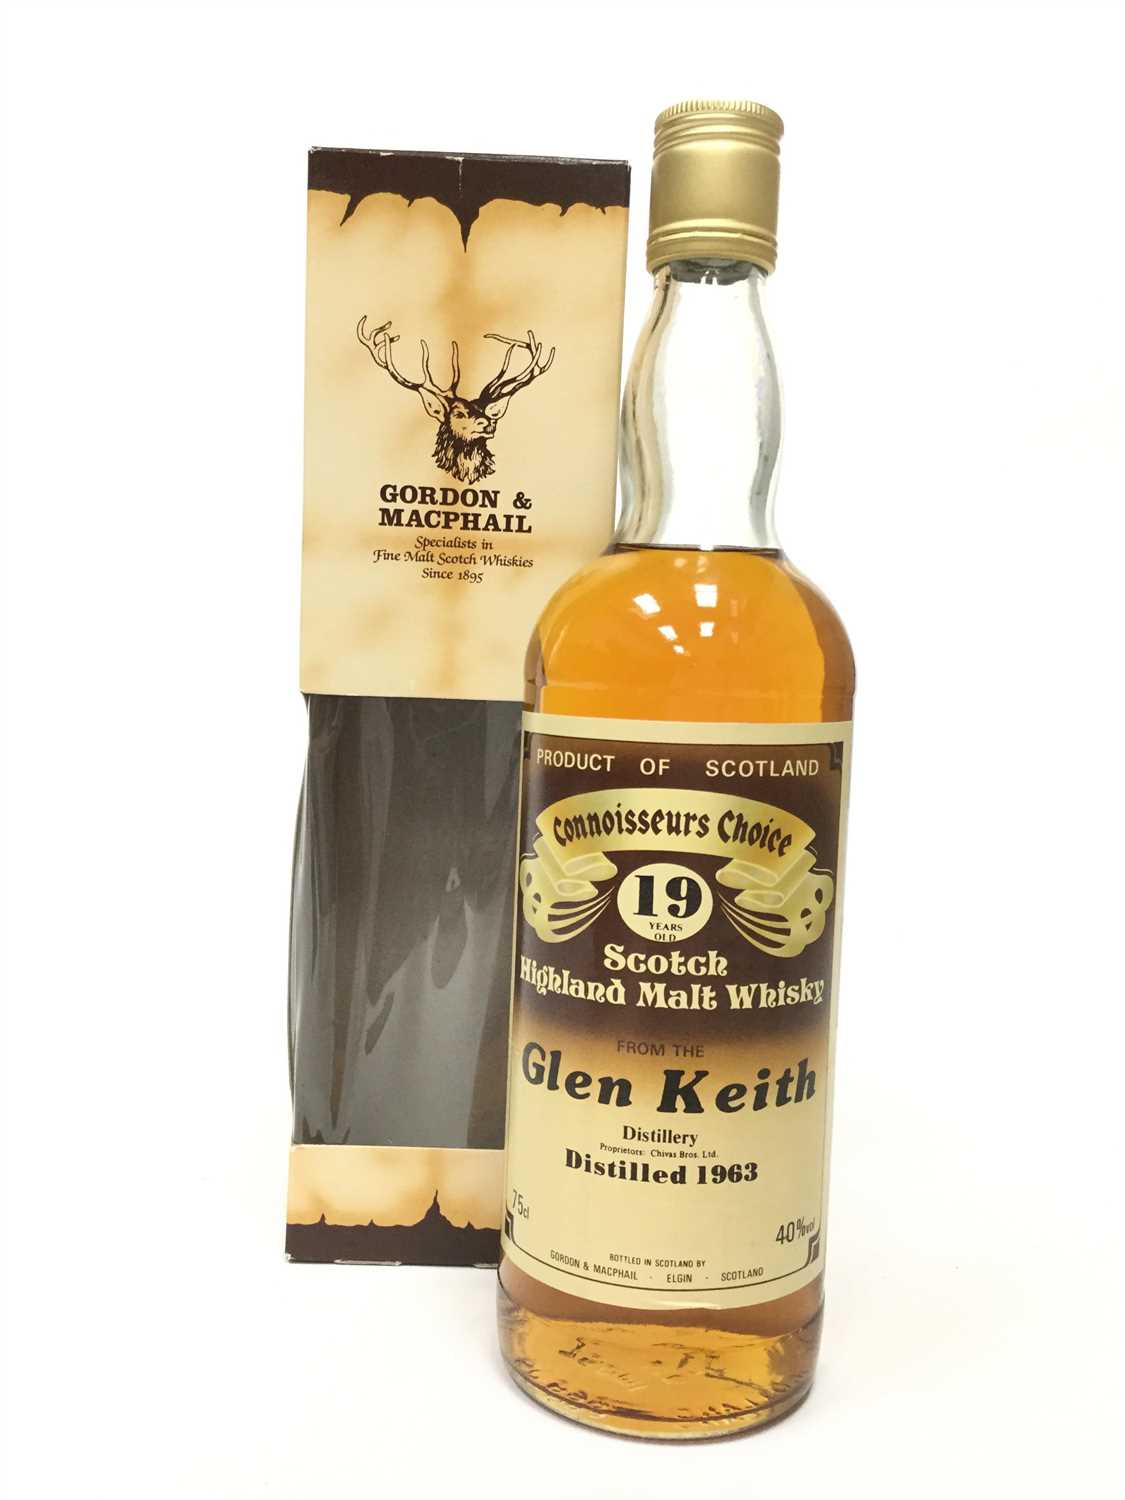 Lot 251 - GLEN KEITH 1963 CONNOISSEURS CHOICE 19 YEARS OLD